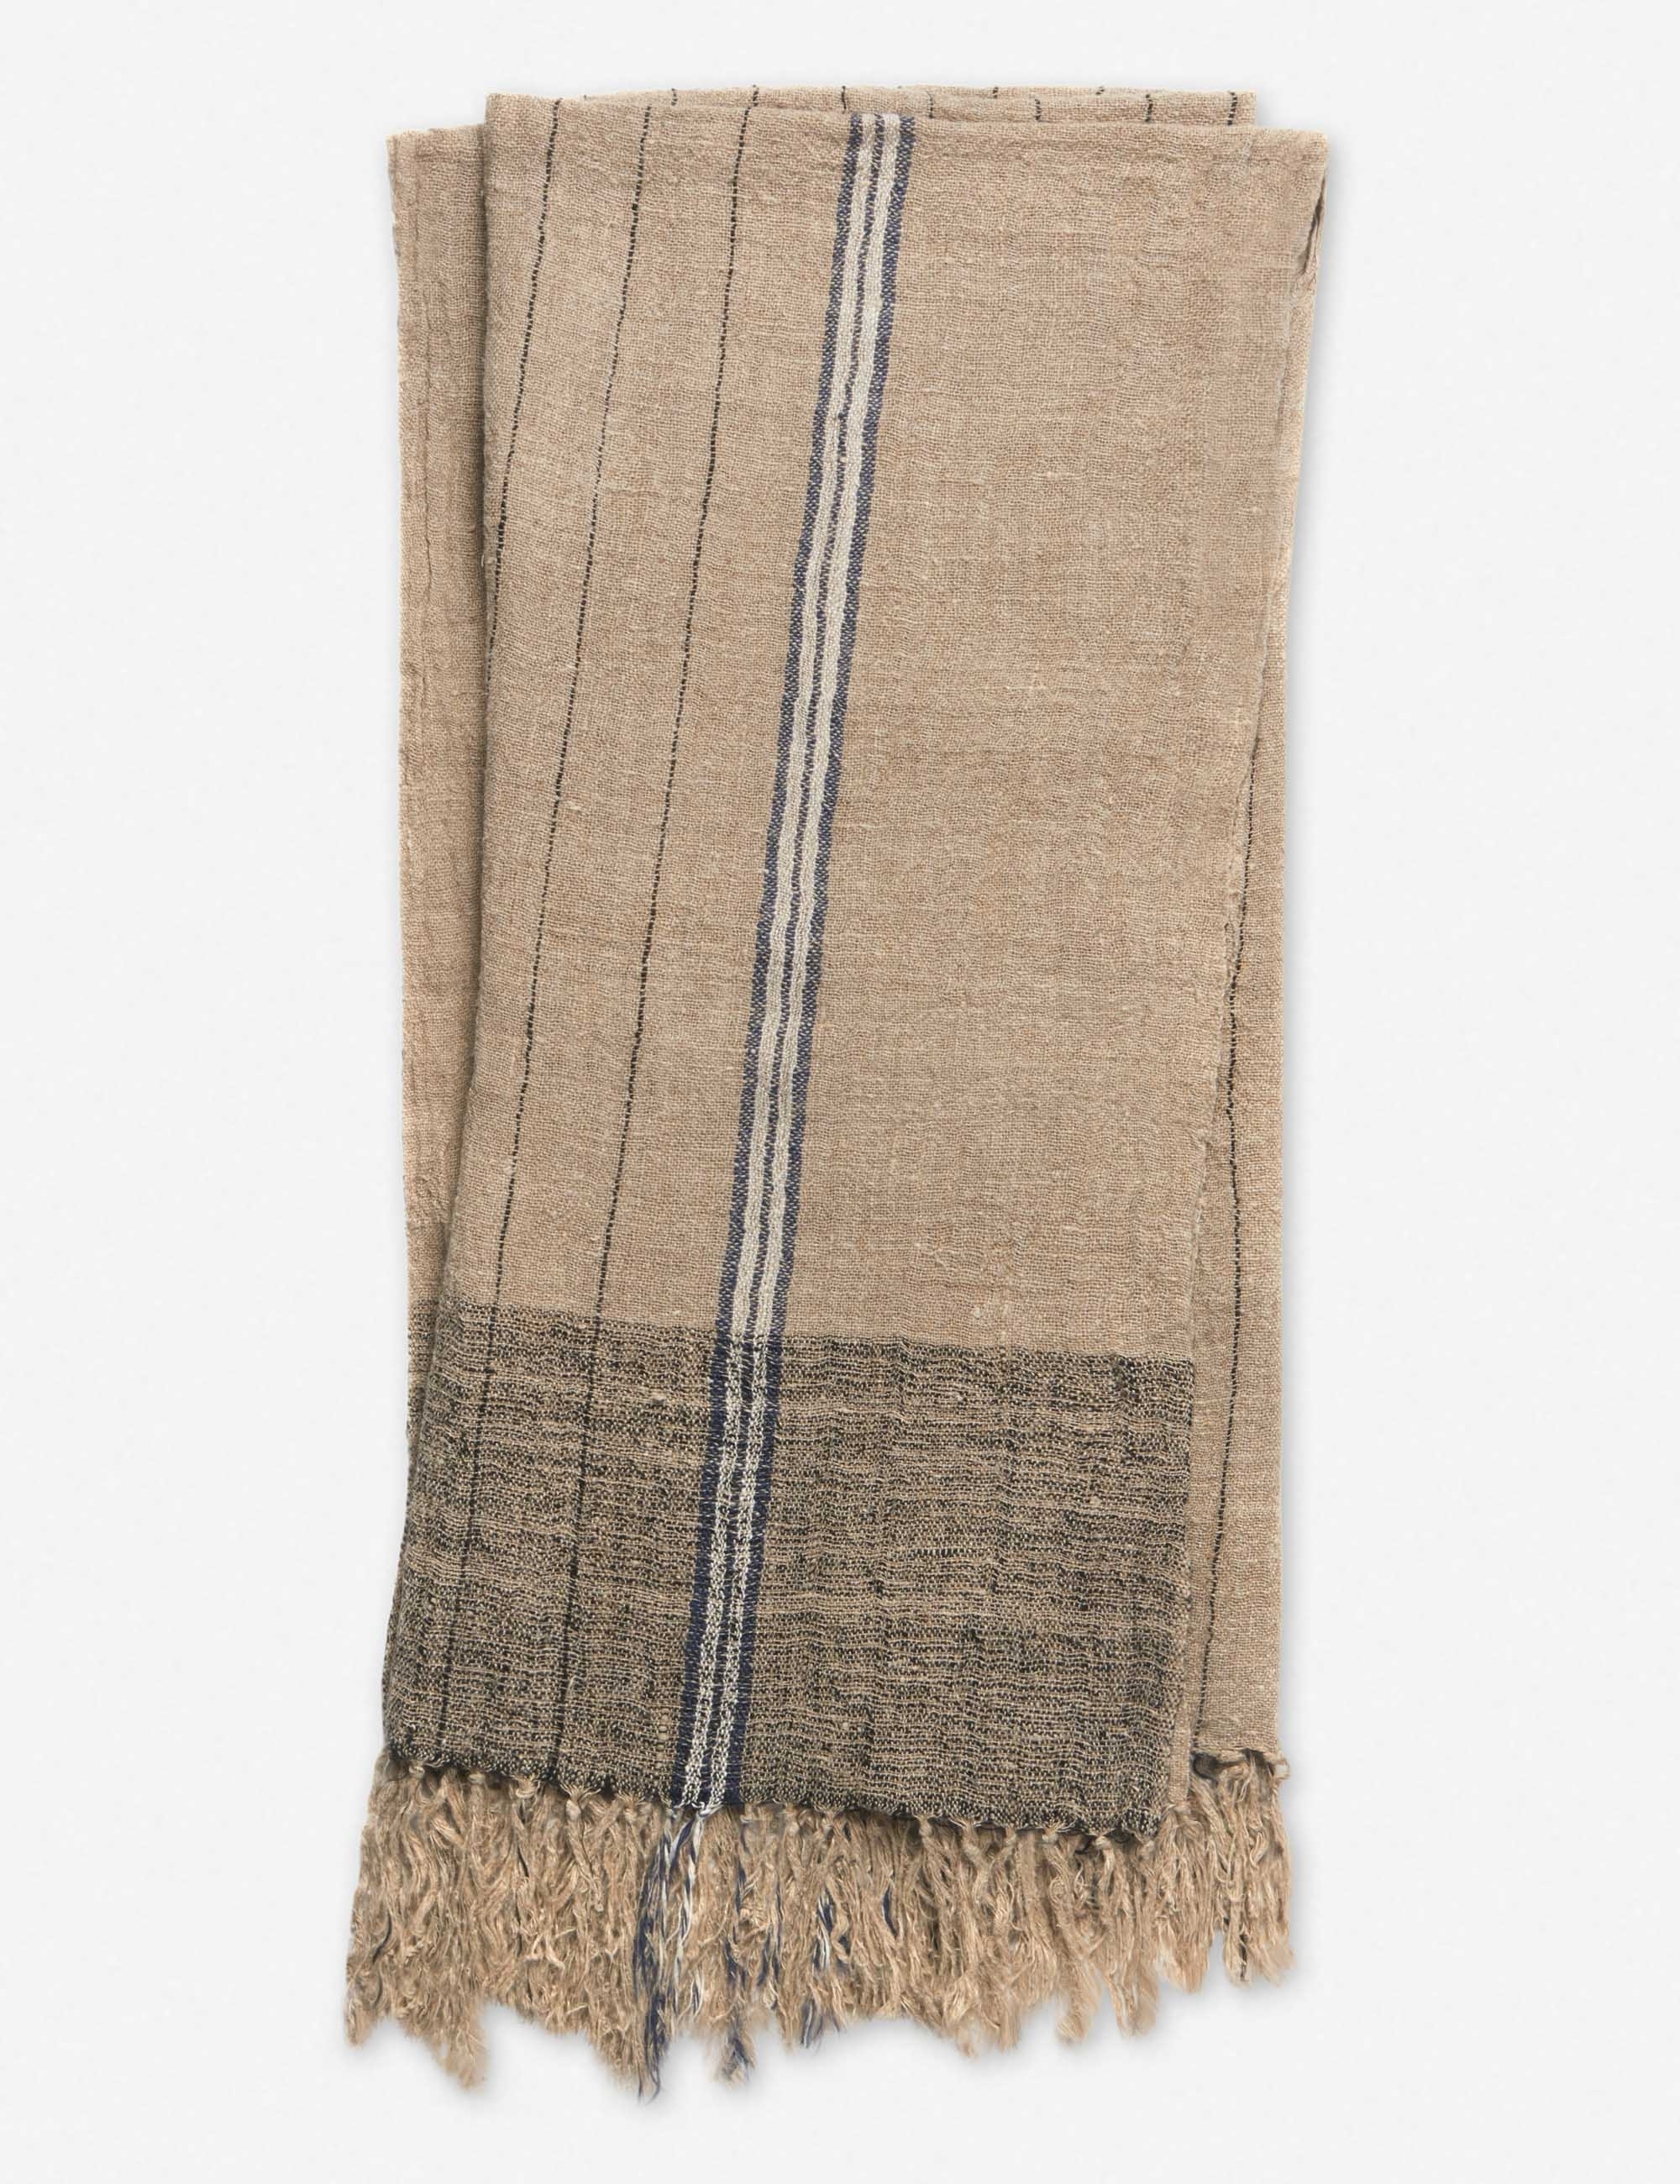 Lynwood Throw, Natural and Multi, ED Ellen DeGeneres Crafted by Loloi - Image 0